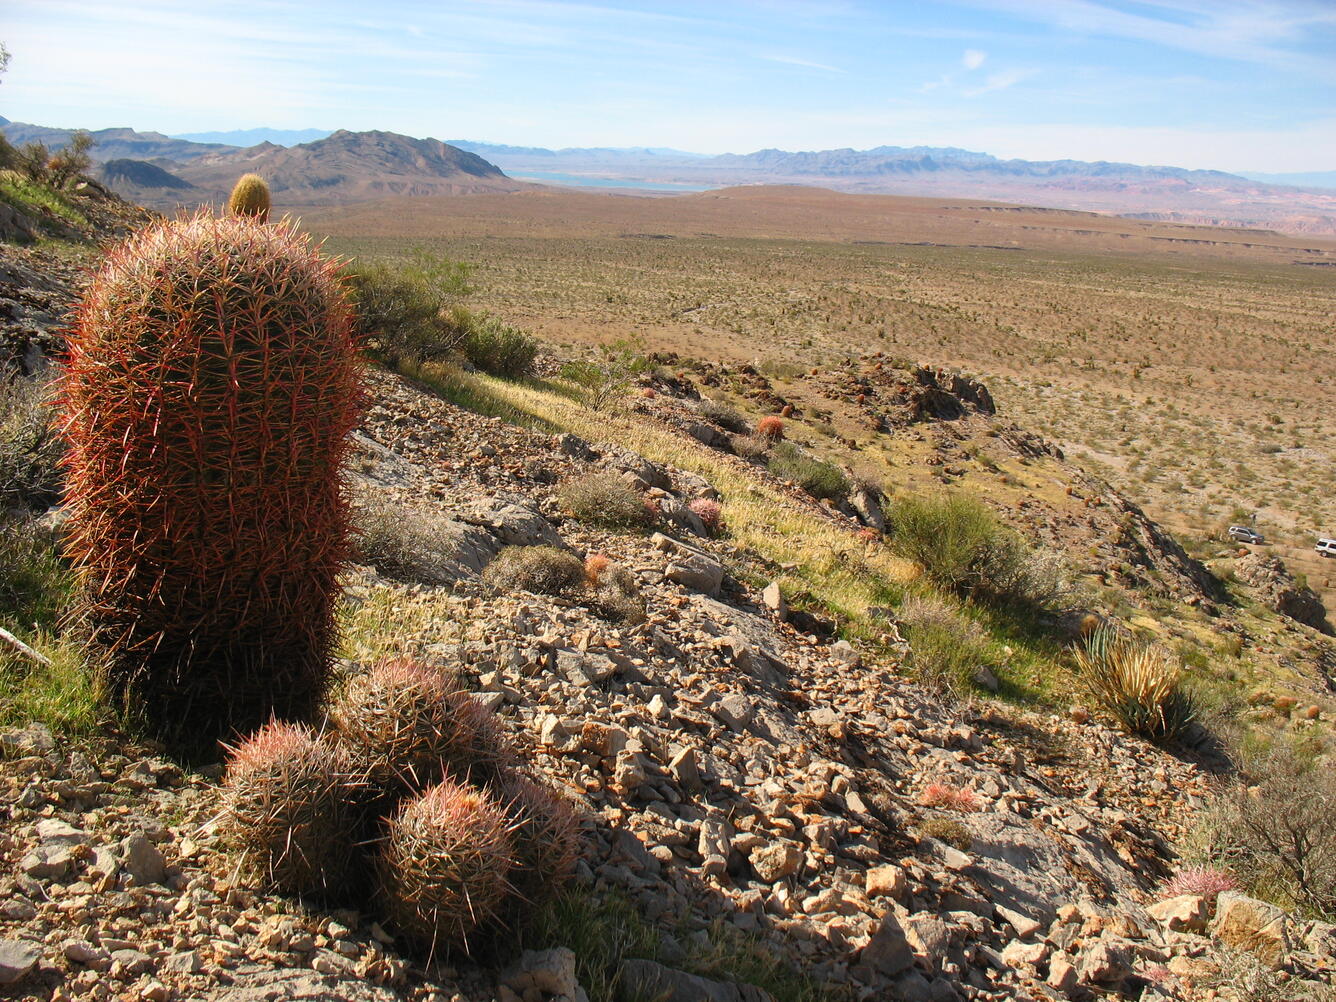 A photo of a cactus against the landscape of the Mojave Desert